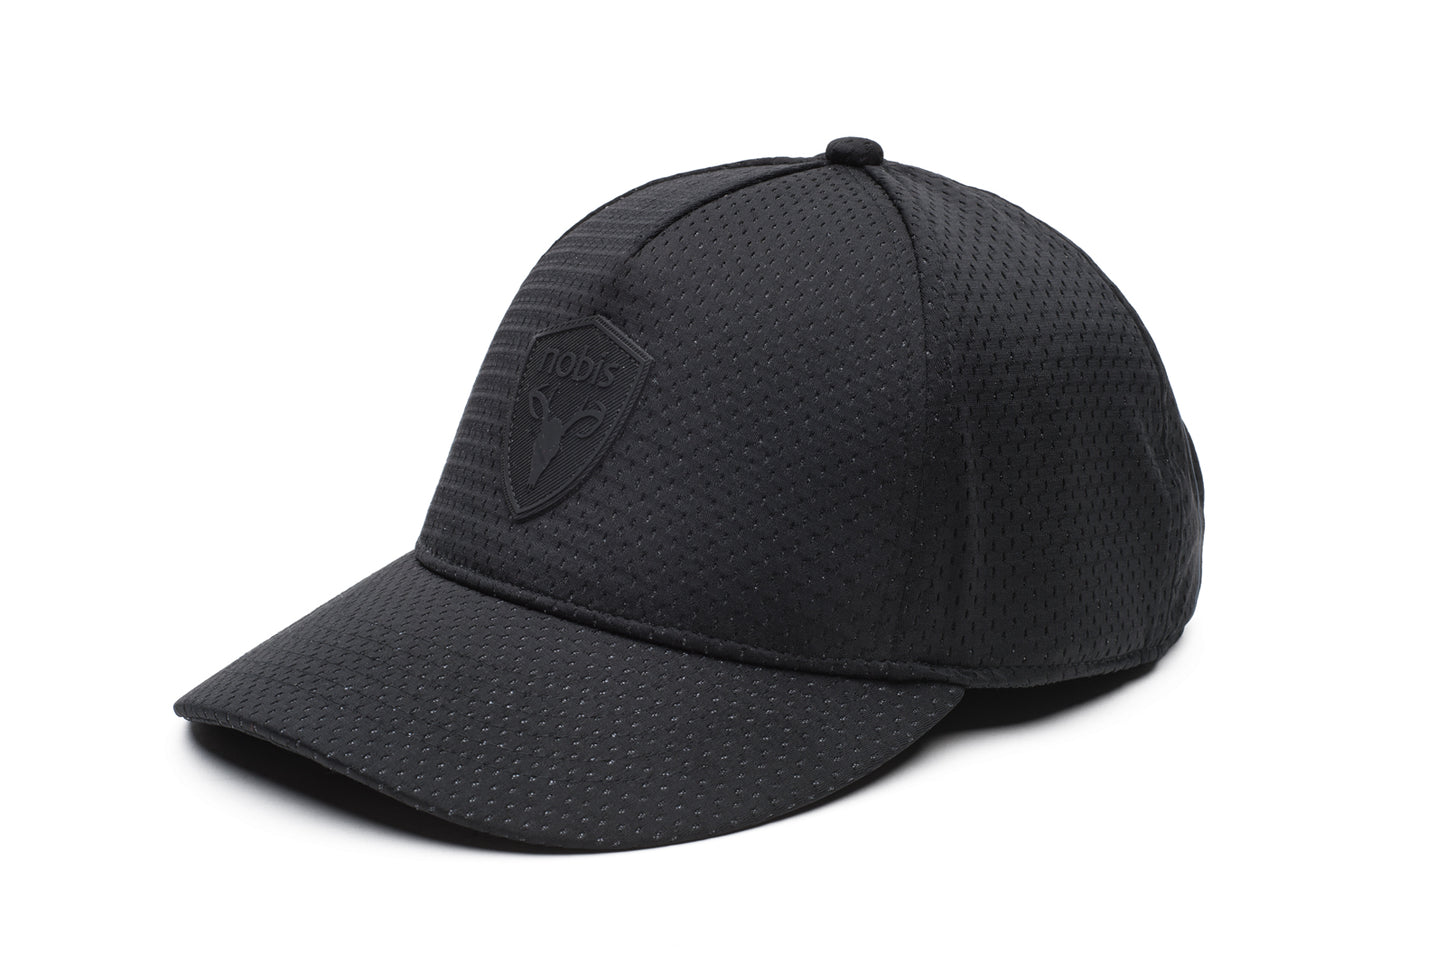 Unisex jersey 5-panel baseball hat with curved brim and adjustable strap at back in Black